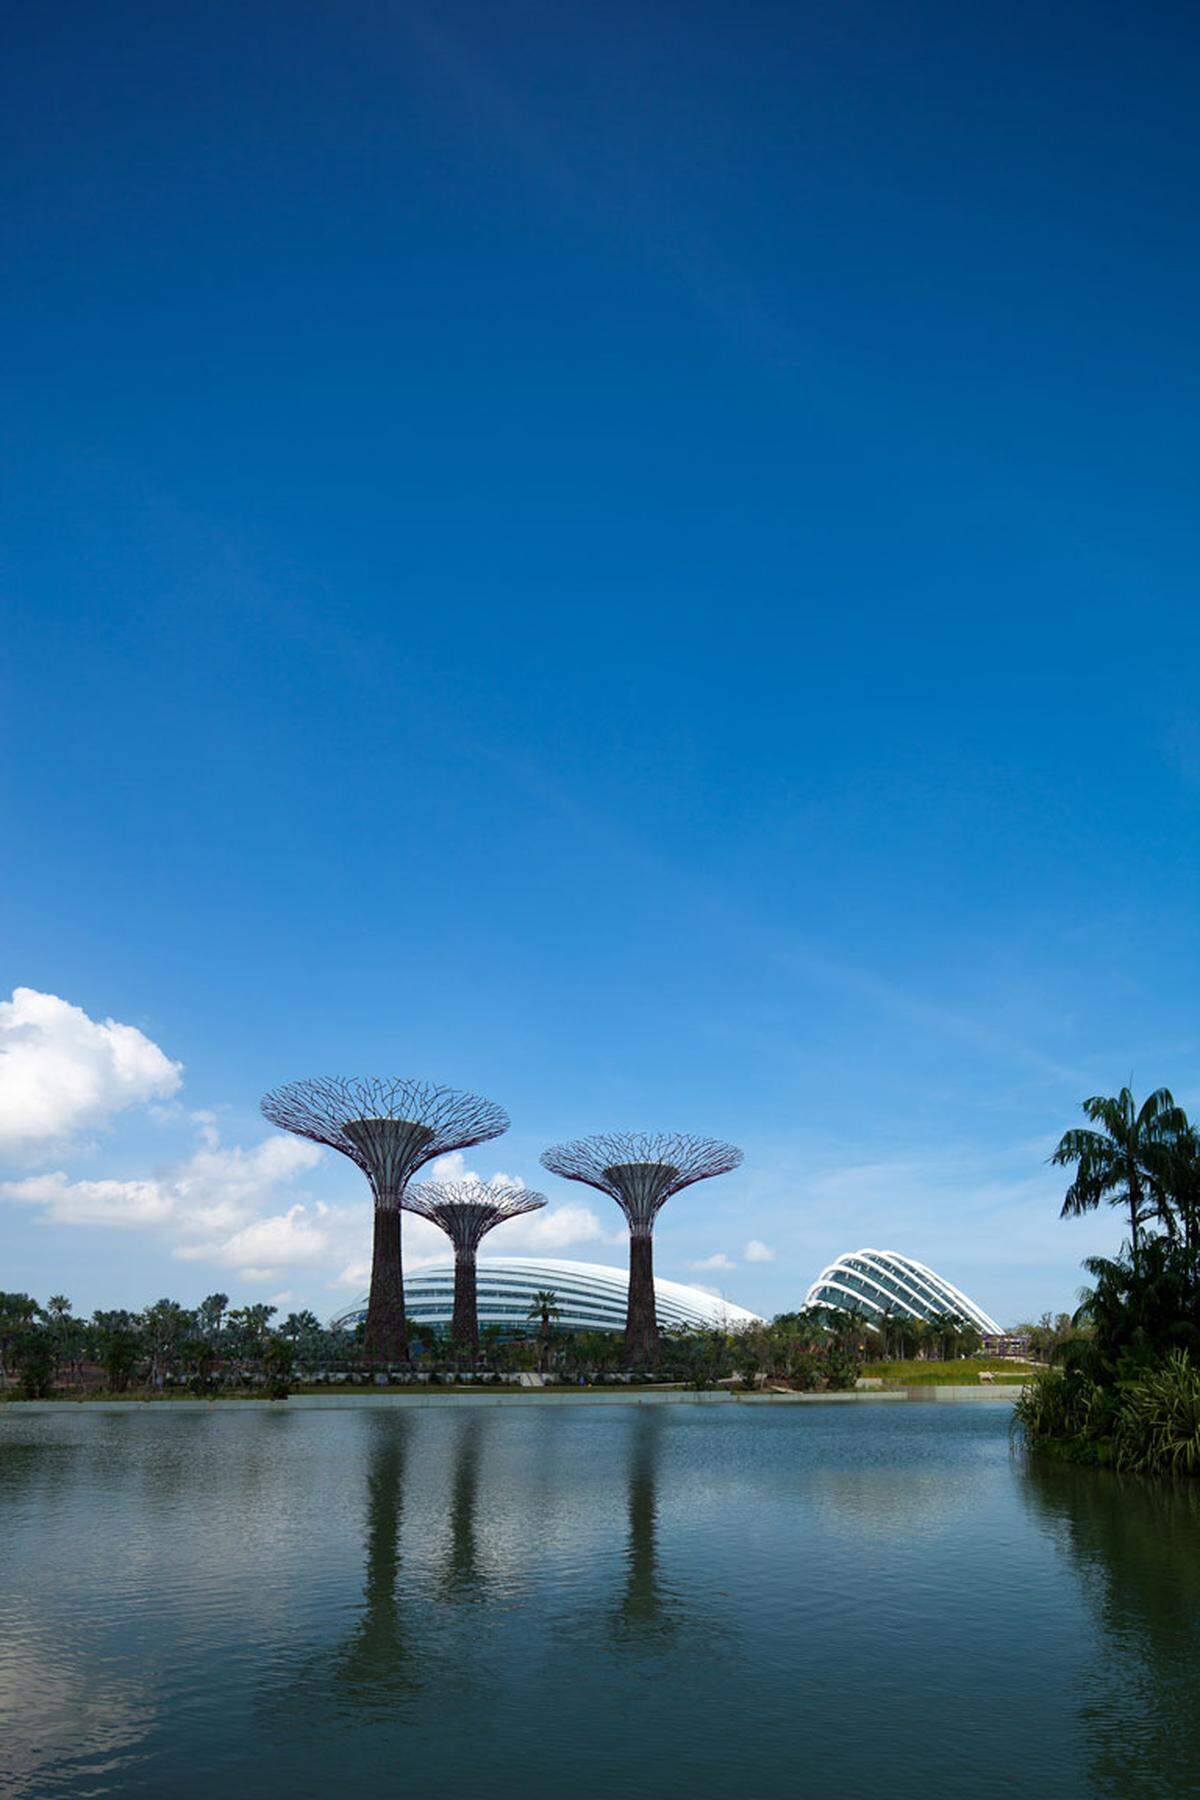 Best Innovative Green Building: Gardens by the Bay, Singapur, Architekt: Grant Associates and Wolkinson Eyre Architects, Developer: National Parks Board Singapore